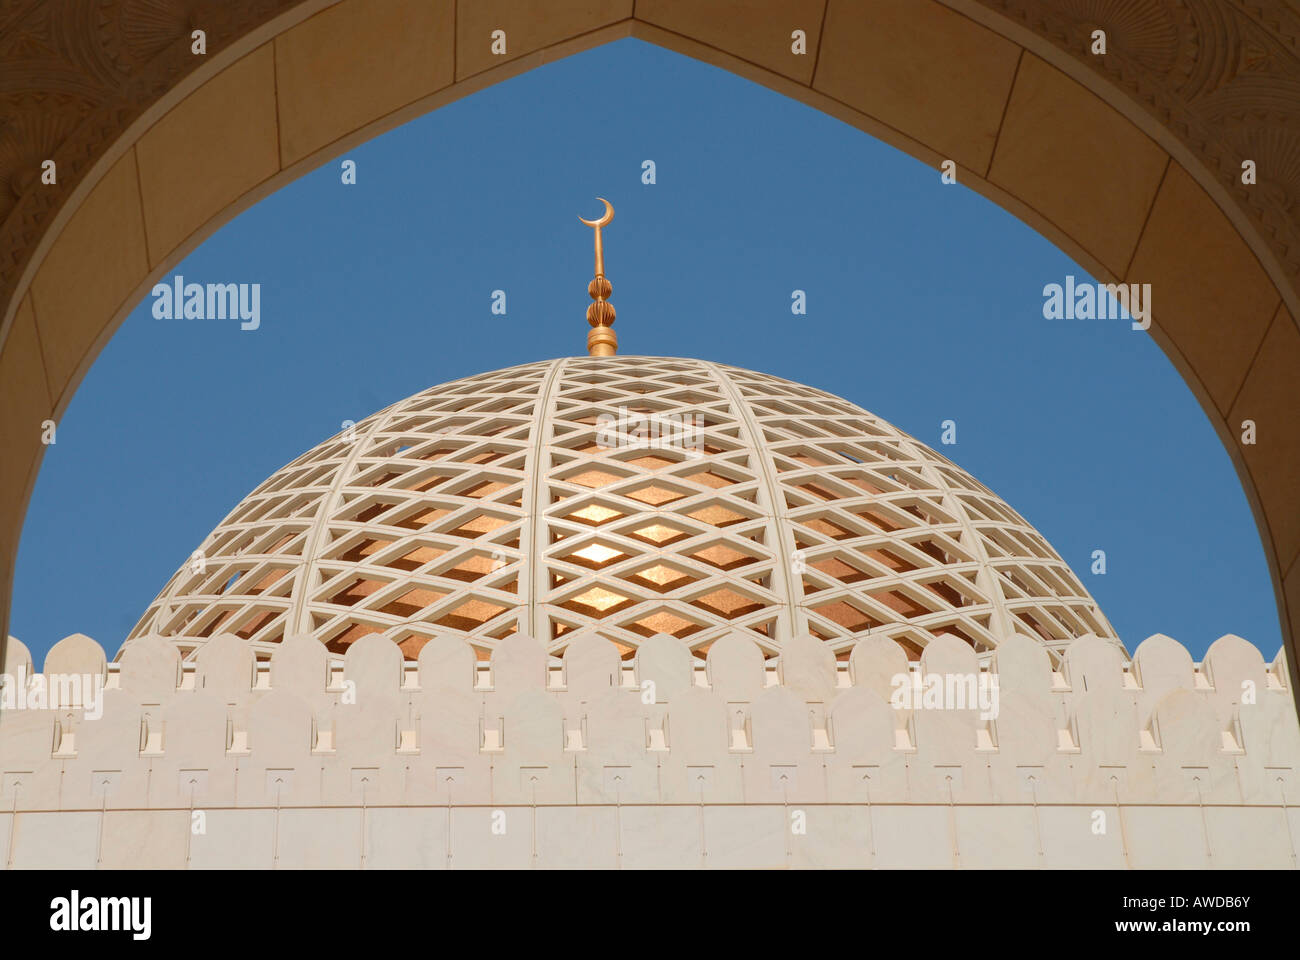 Dome of Sultan Kaboos mosque (Great Mosque), Muscat, Oman Stock Photo